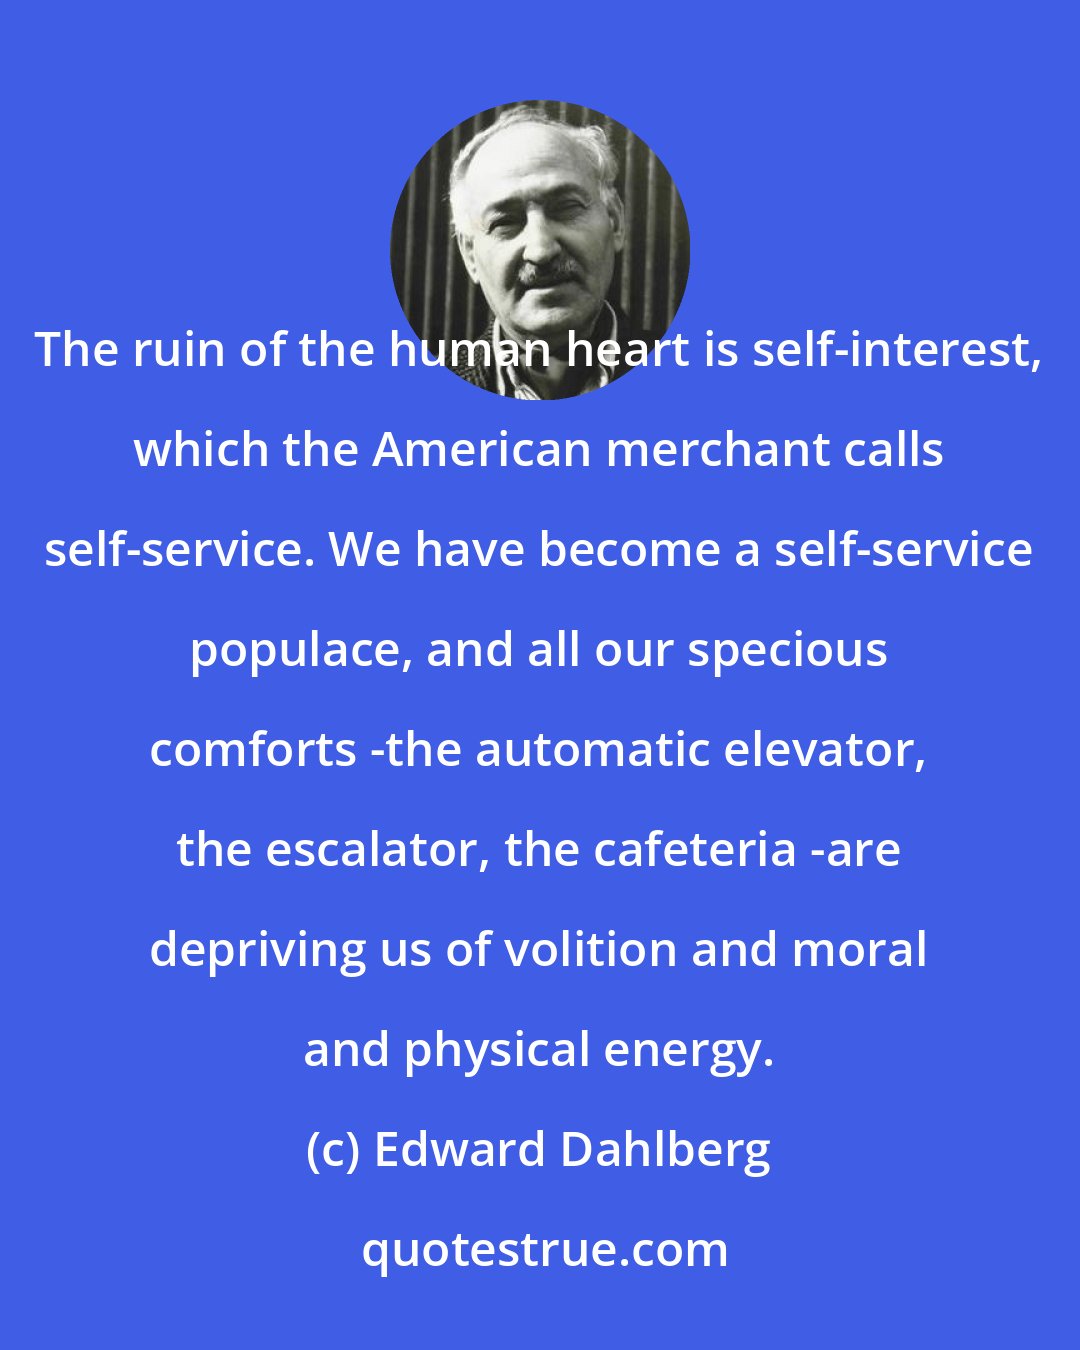 Edward Dahlberg: The ruin of the human heart is self-interest, which the American merchant calls self-service. We have become a self-service populace, and all our specious comforts -the automatic elevator, the escalator, the cafeteria -are depriving us of volition and moral and physical energy.